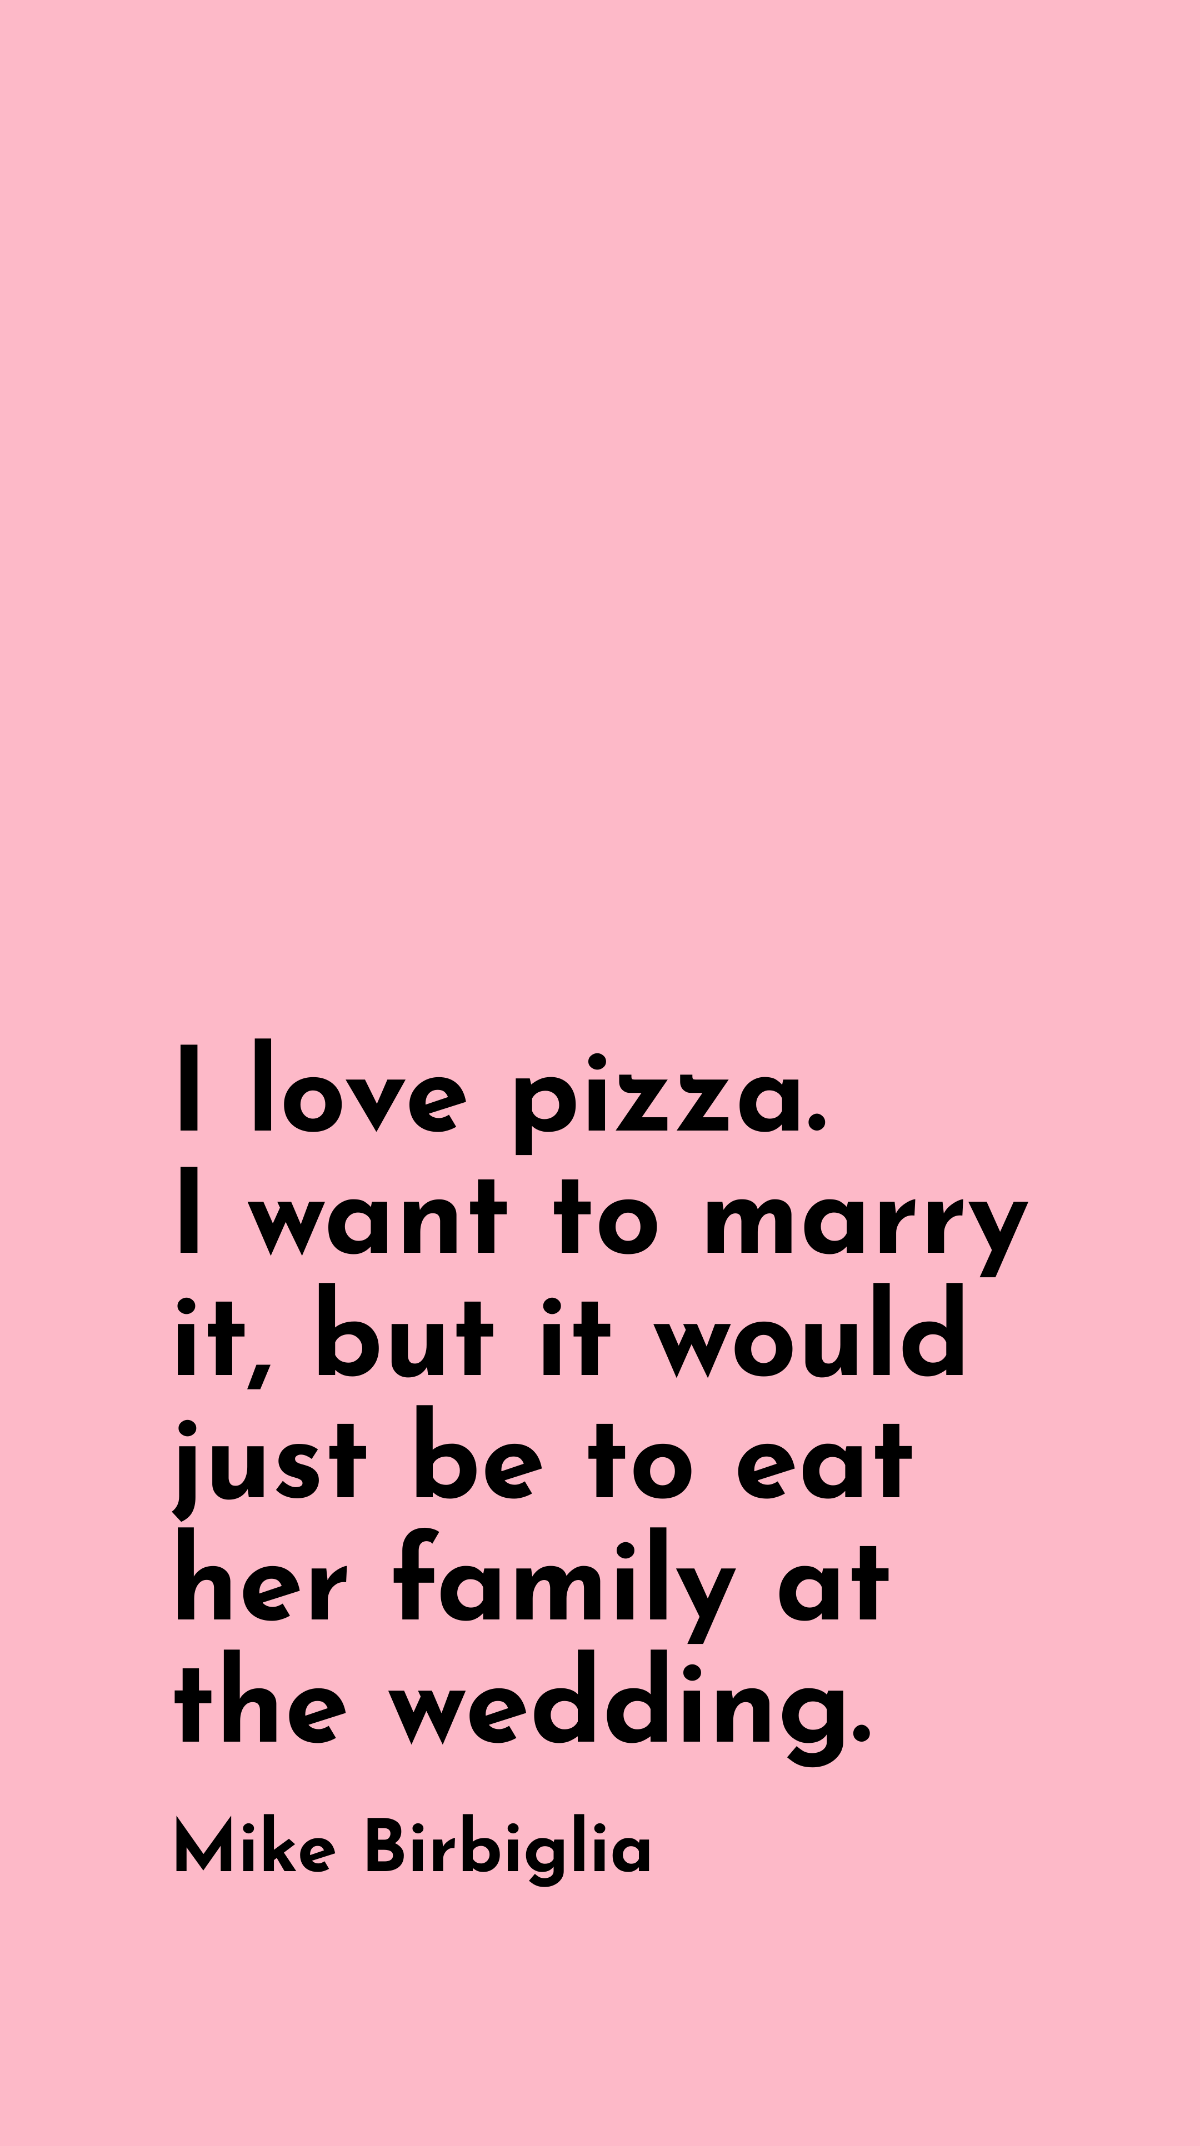 Free Mike Birbiglia - I love pizza. I want to marry it, but it would just be to eat her family at the wedding. Template